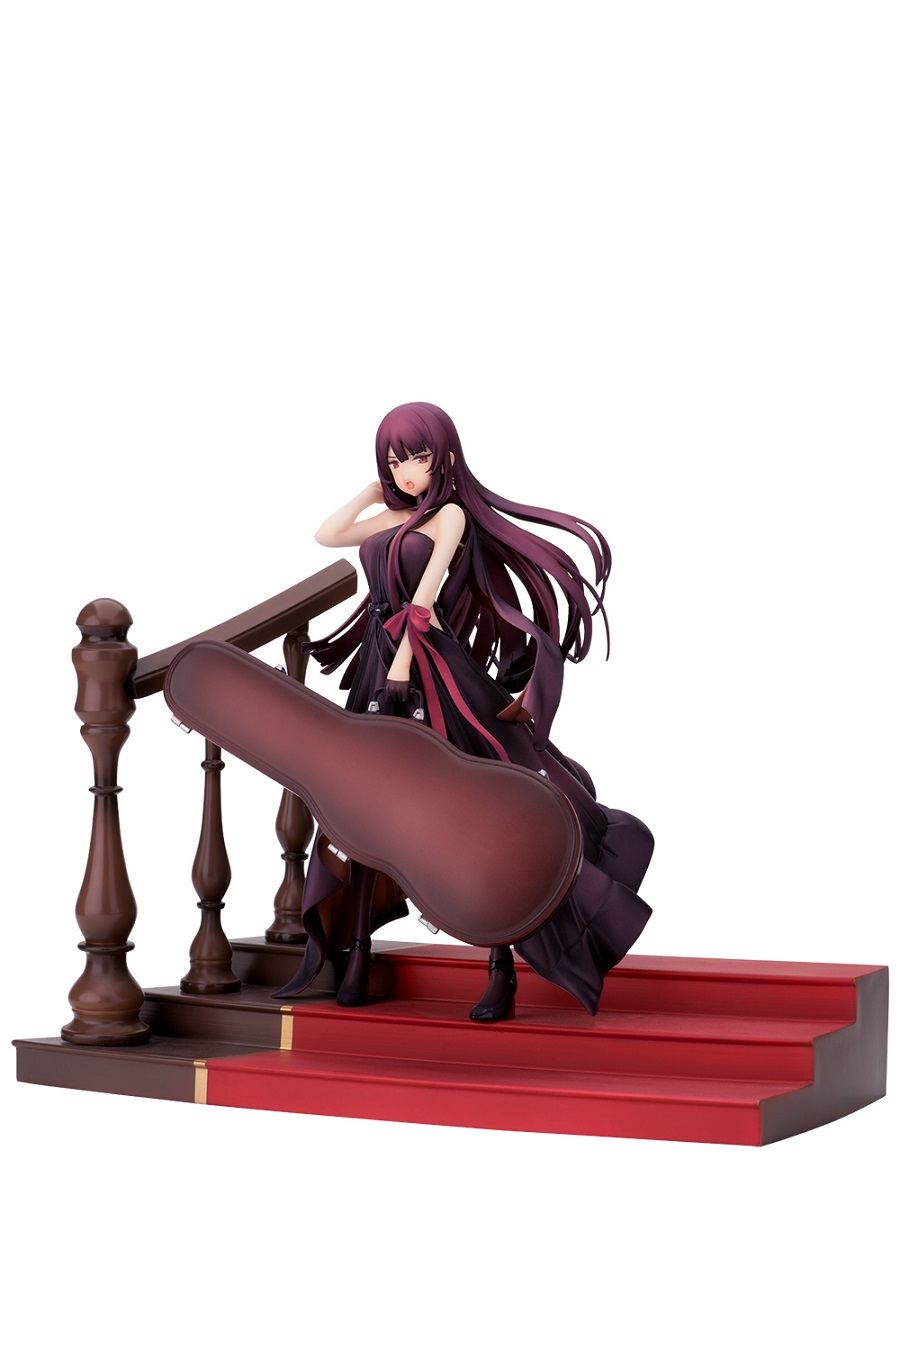 GIRLS' FRONTLINE 1/8 SCALE PRE-PAINTED FIGURE: WA2000 REST OF THE BALL VER. Hobbymax